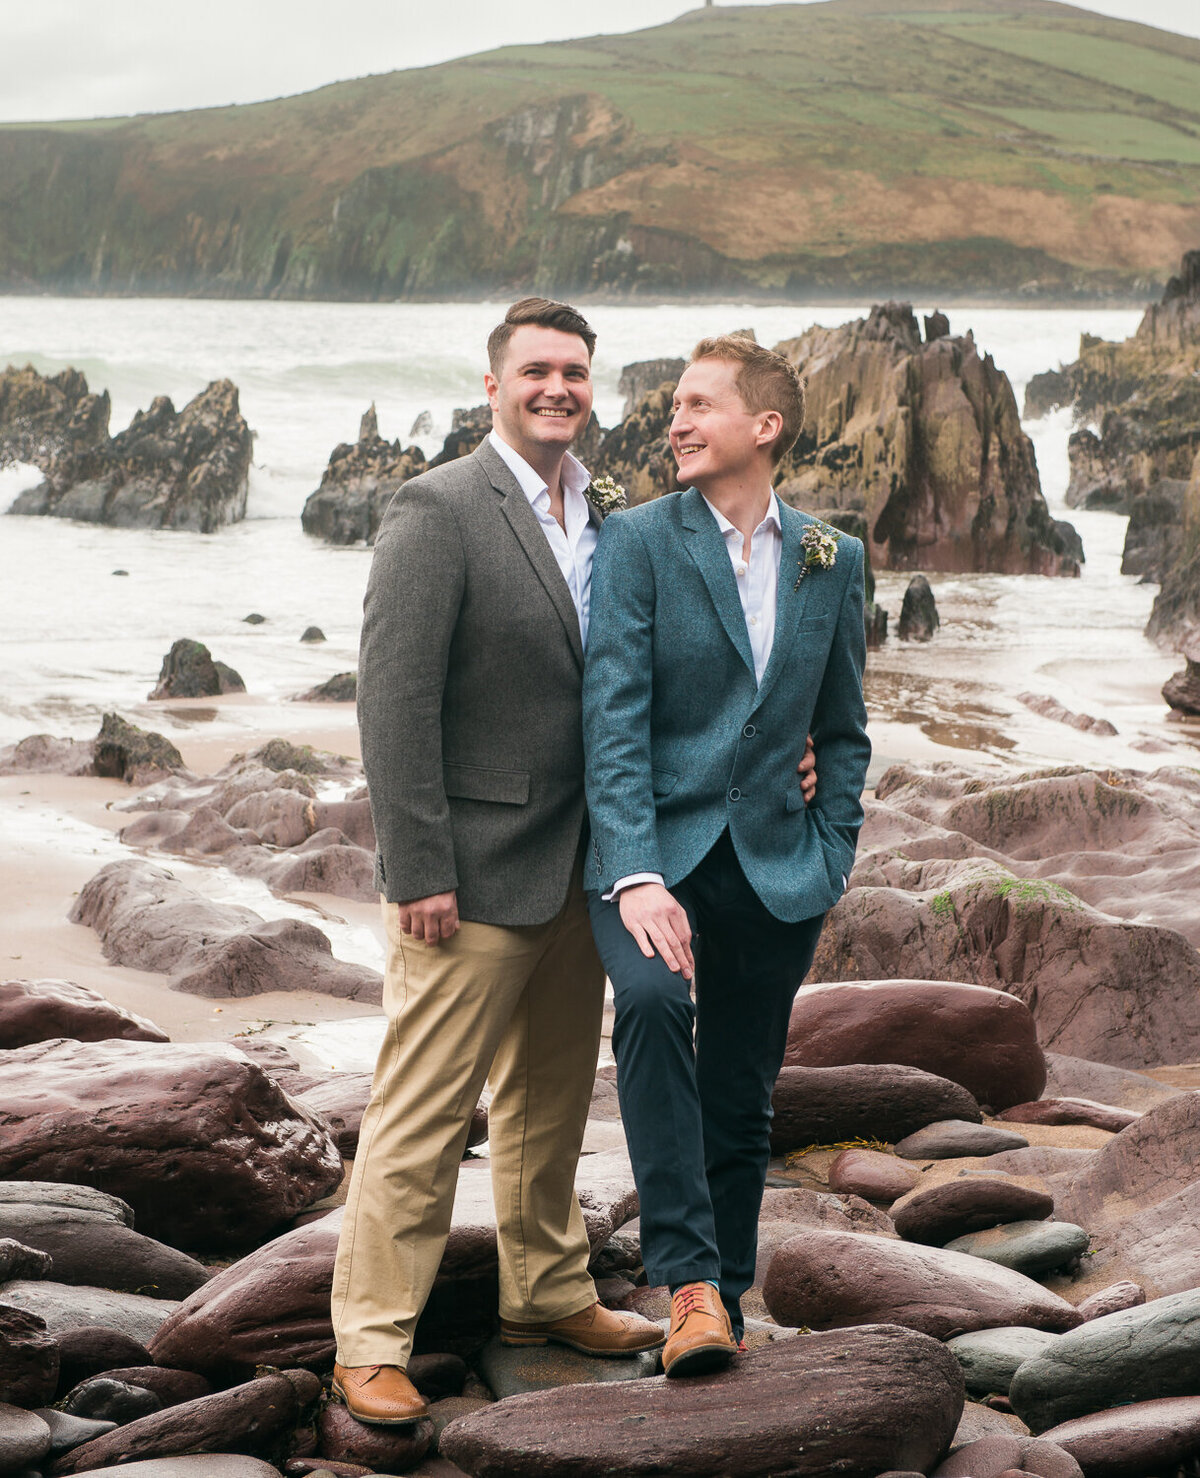 Two grooms standing on rocks looking at each other on beach